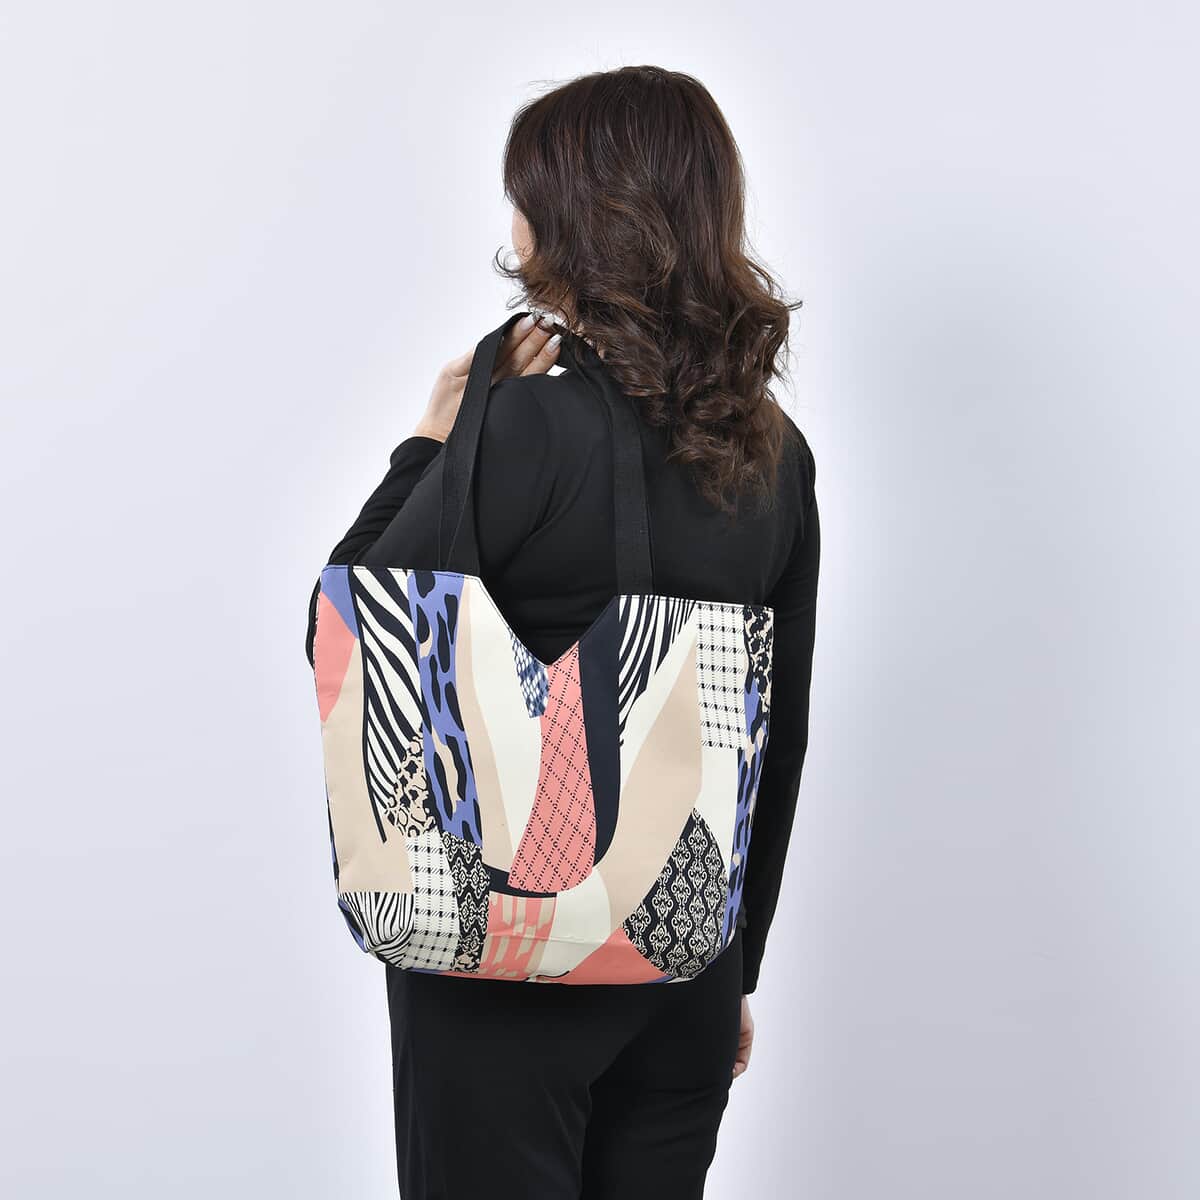 Multi Color Splice Patchwork Printed Pattern Tote Bag (17.5"x6"x13.5") with Handle Drop image number 1